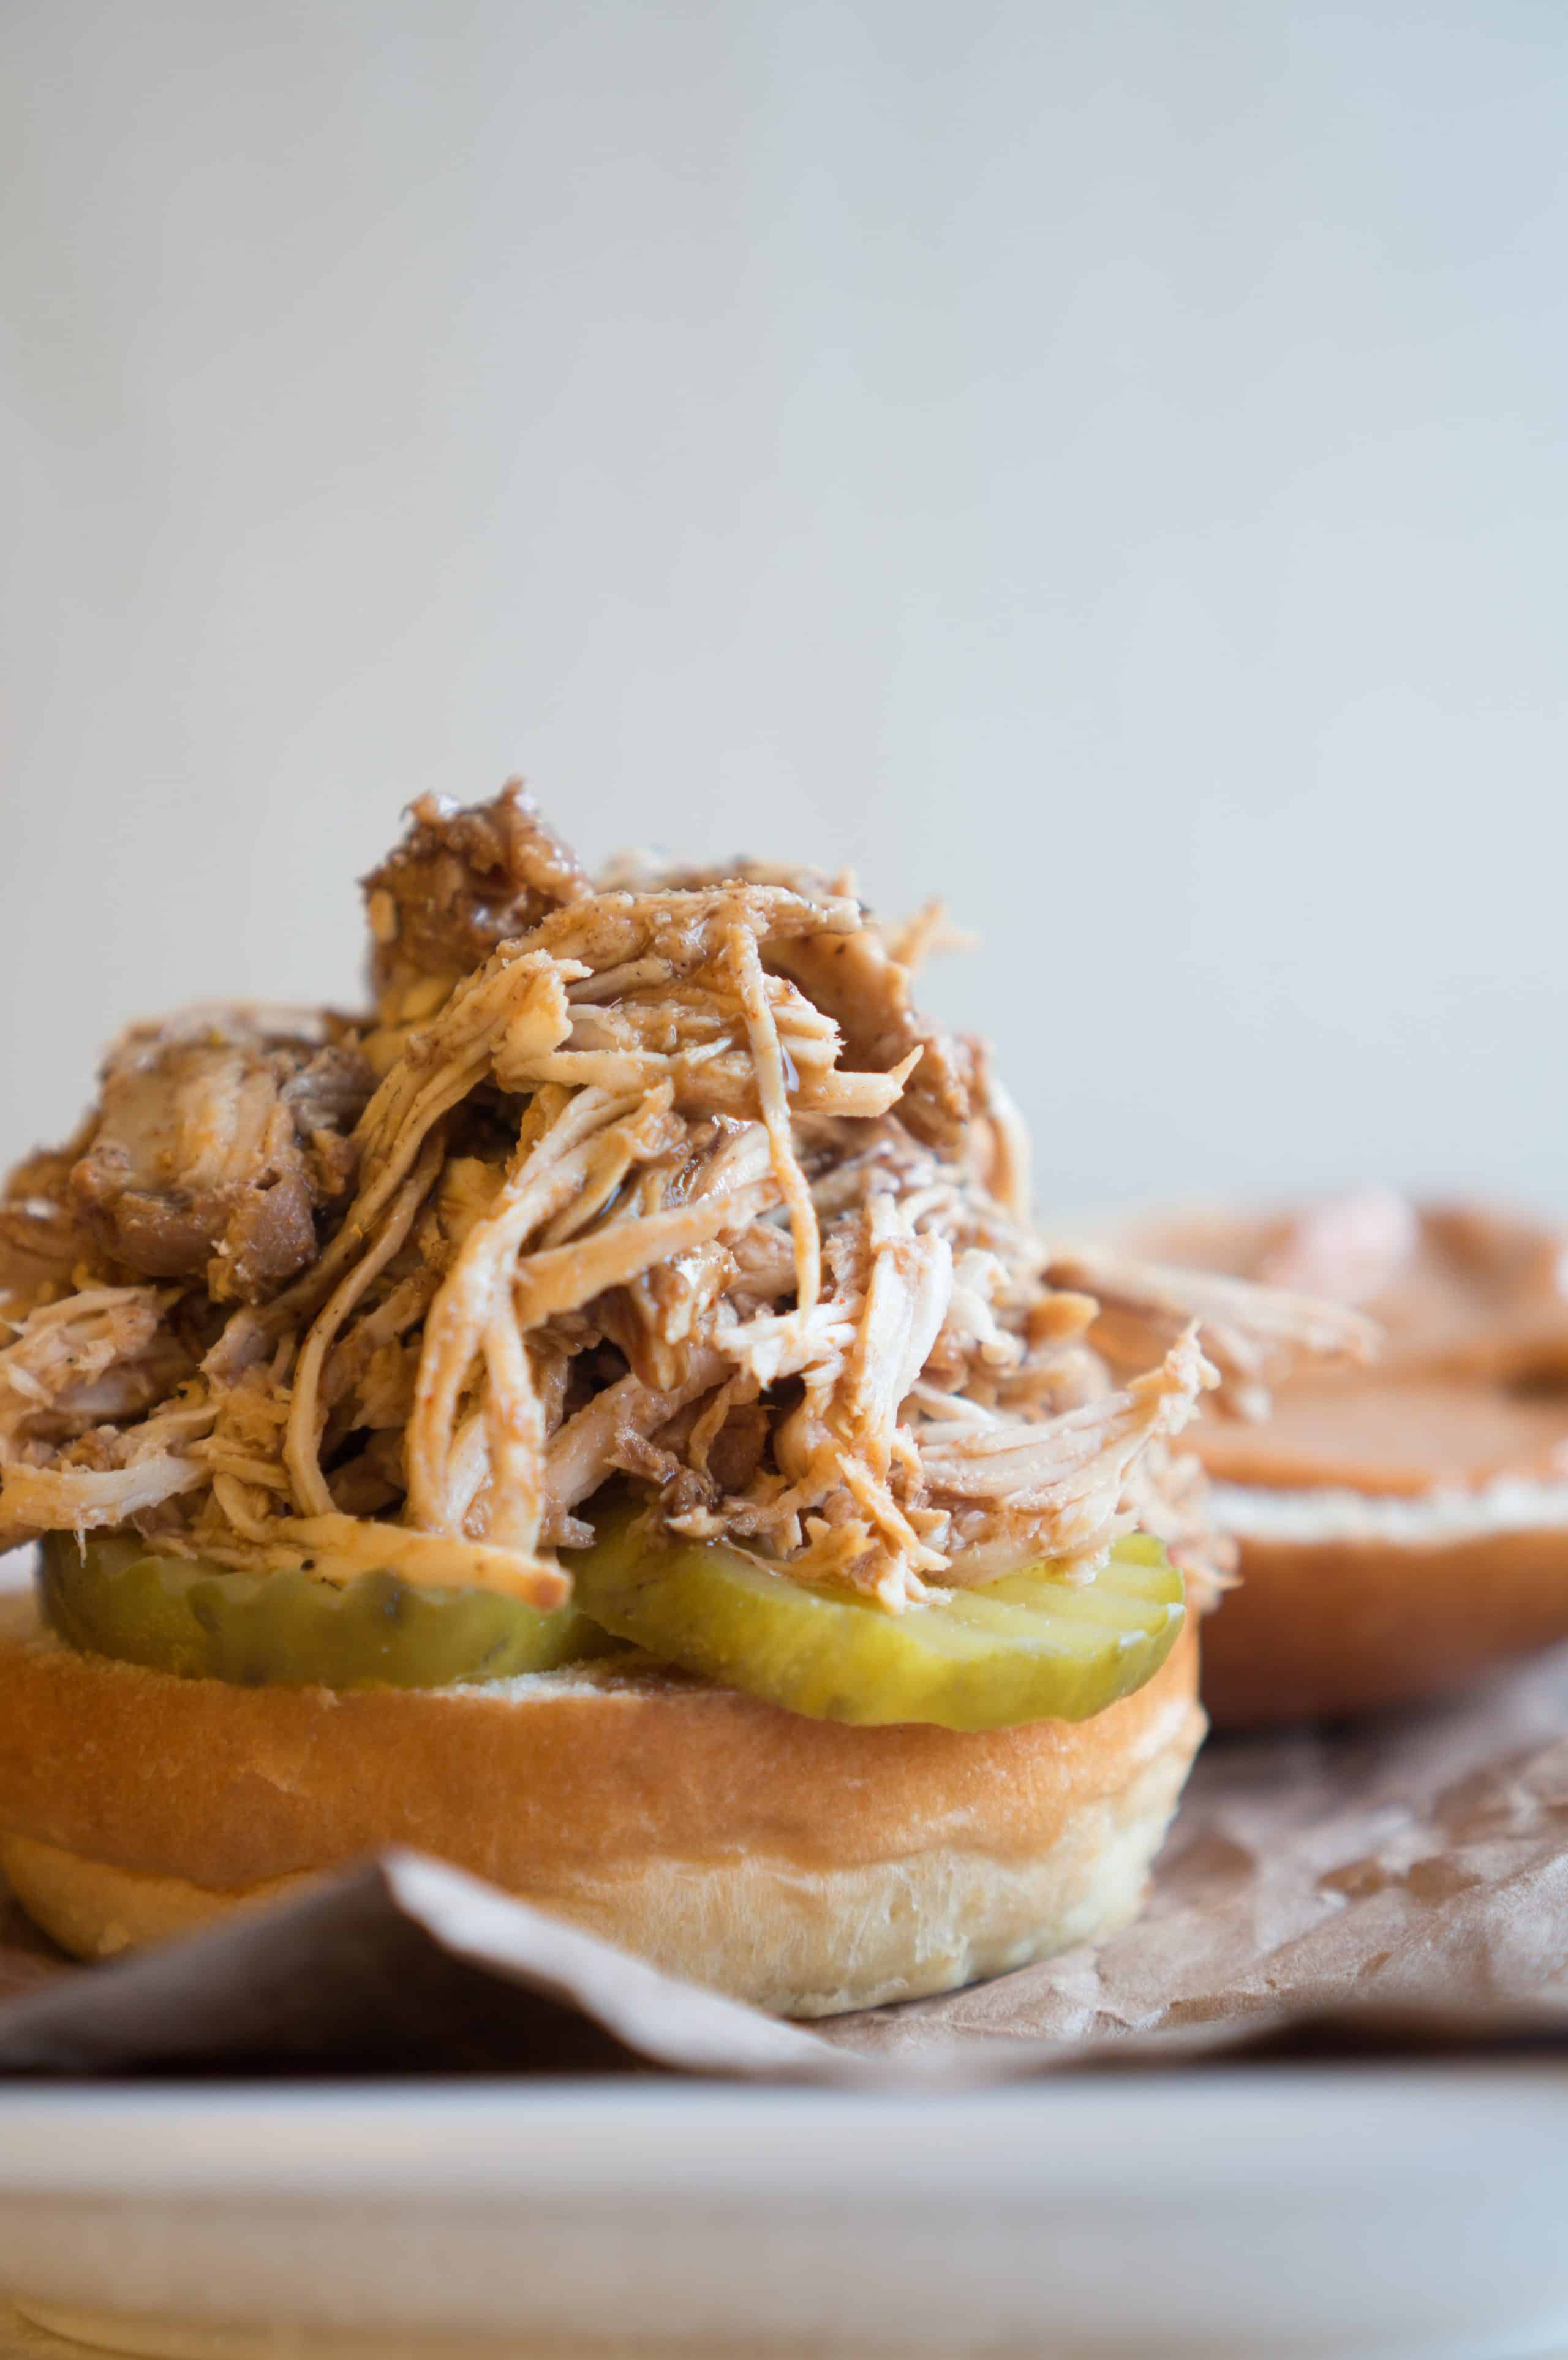 BBQ Pulled Chicken Sliders – Easy Crockpot Shredded Chicken makes this BBQ Pulled Chicken Slider recipe a cinch to pull off for weeknight dinners or weekend gatherings! Lean, protein-packed chicken + sweet BBQ sauce + smokey chipotle mayo + crunchy pickles all loaded up on a baby brioche bun. We love how easy these tasty little sliders are to assemble! They are a total life-saver for those parties where you have LOTS of mouths to feed but don’t want to get stuck in the kitchen all night! ♥ | freeyourfork.com